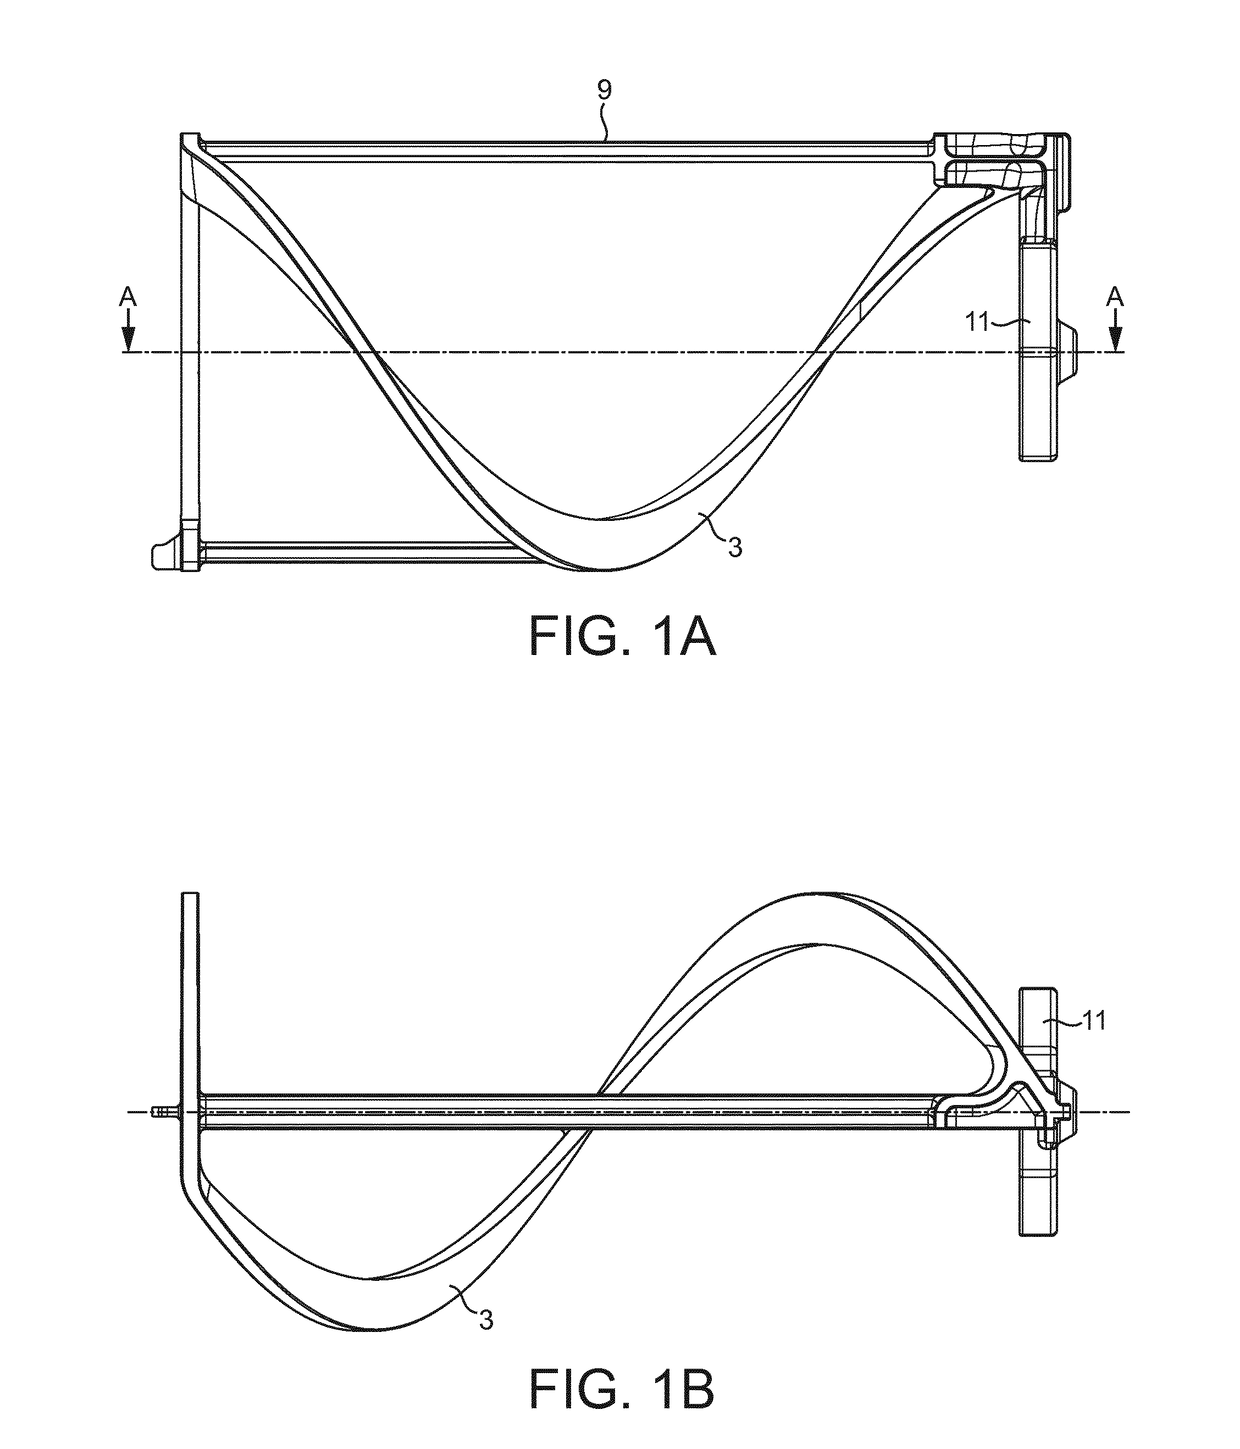 Helical movement device